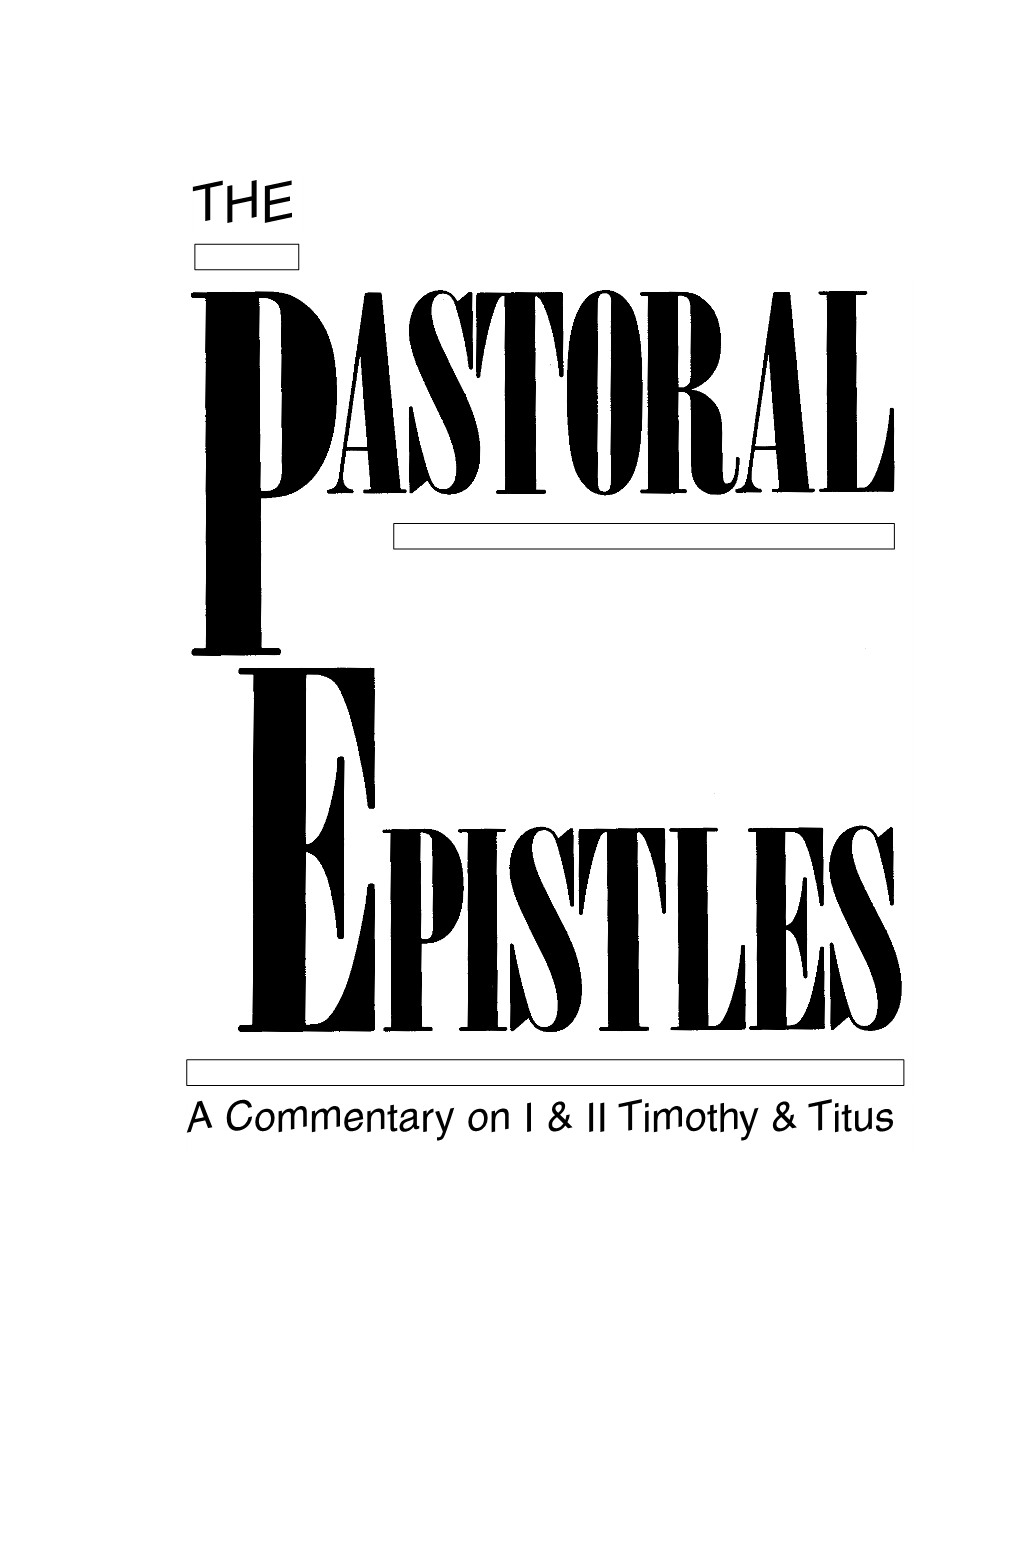 Pastoral Epistles a Commentary on I and II Timothy and Titus by J